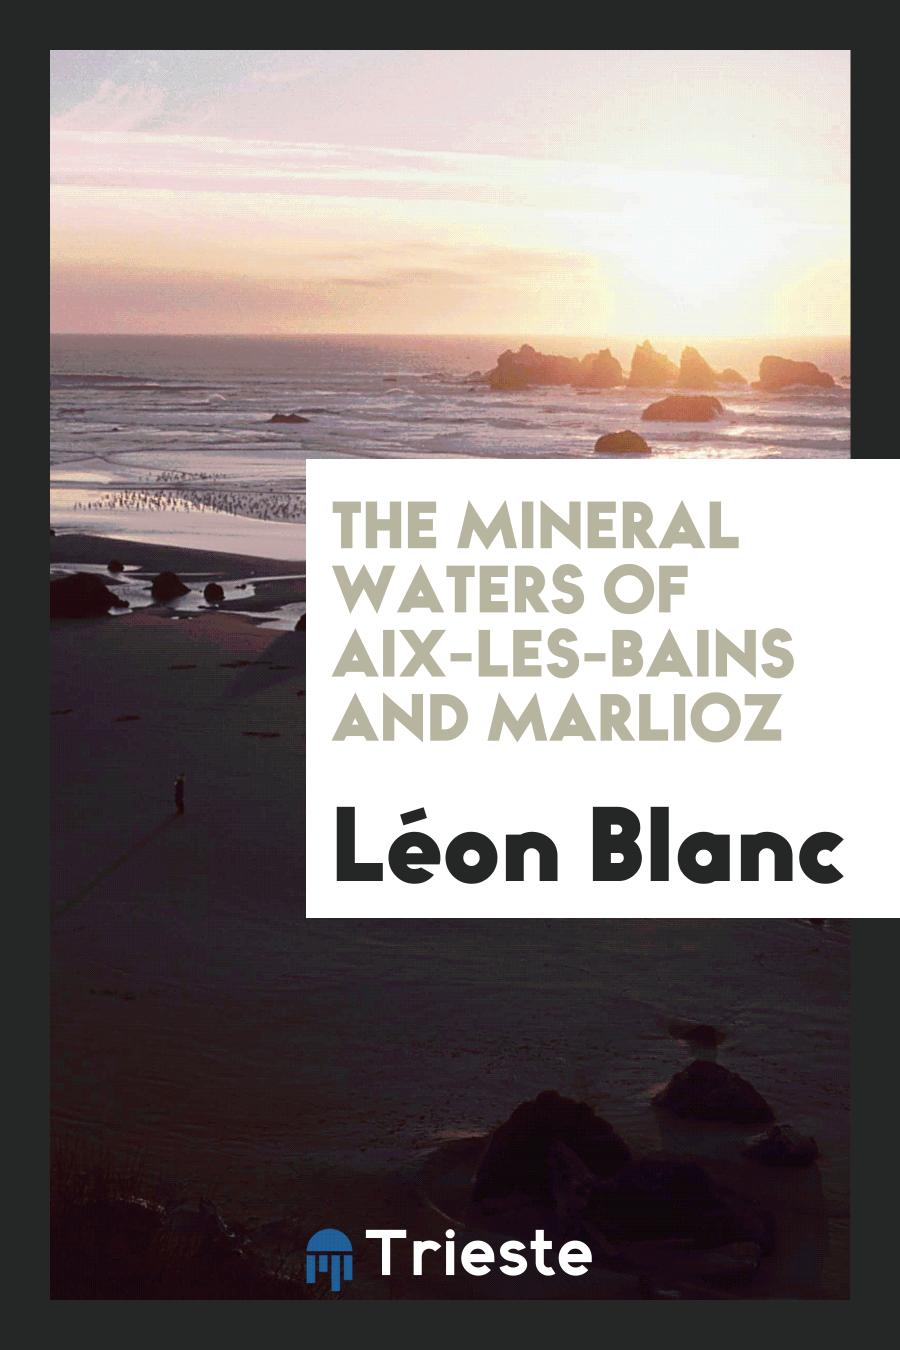 The mineral waters of Aix-les-bains and Marlioz